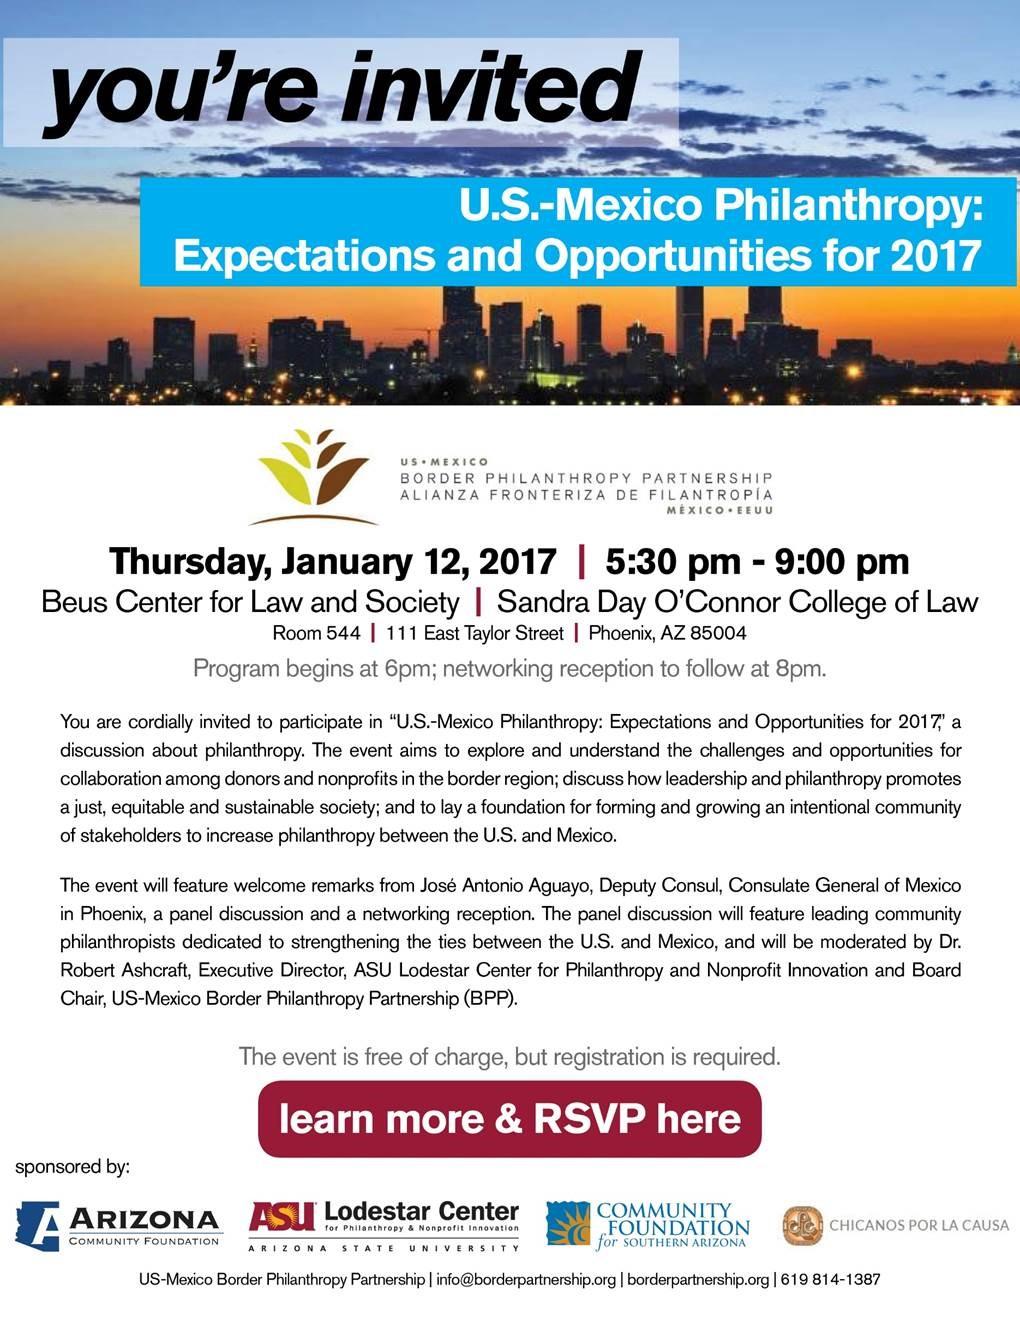 U.S.- Mexico Philanthrophy: Expectations and Opportunities for 2017